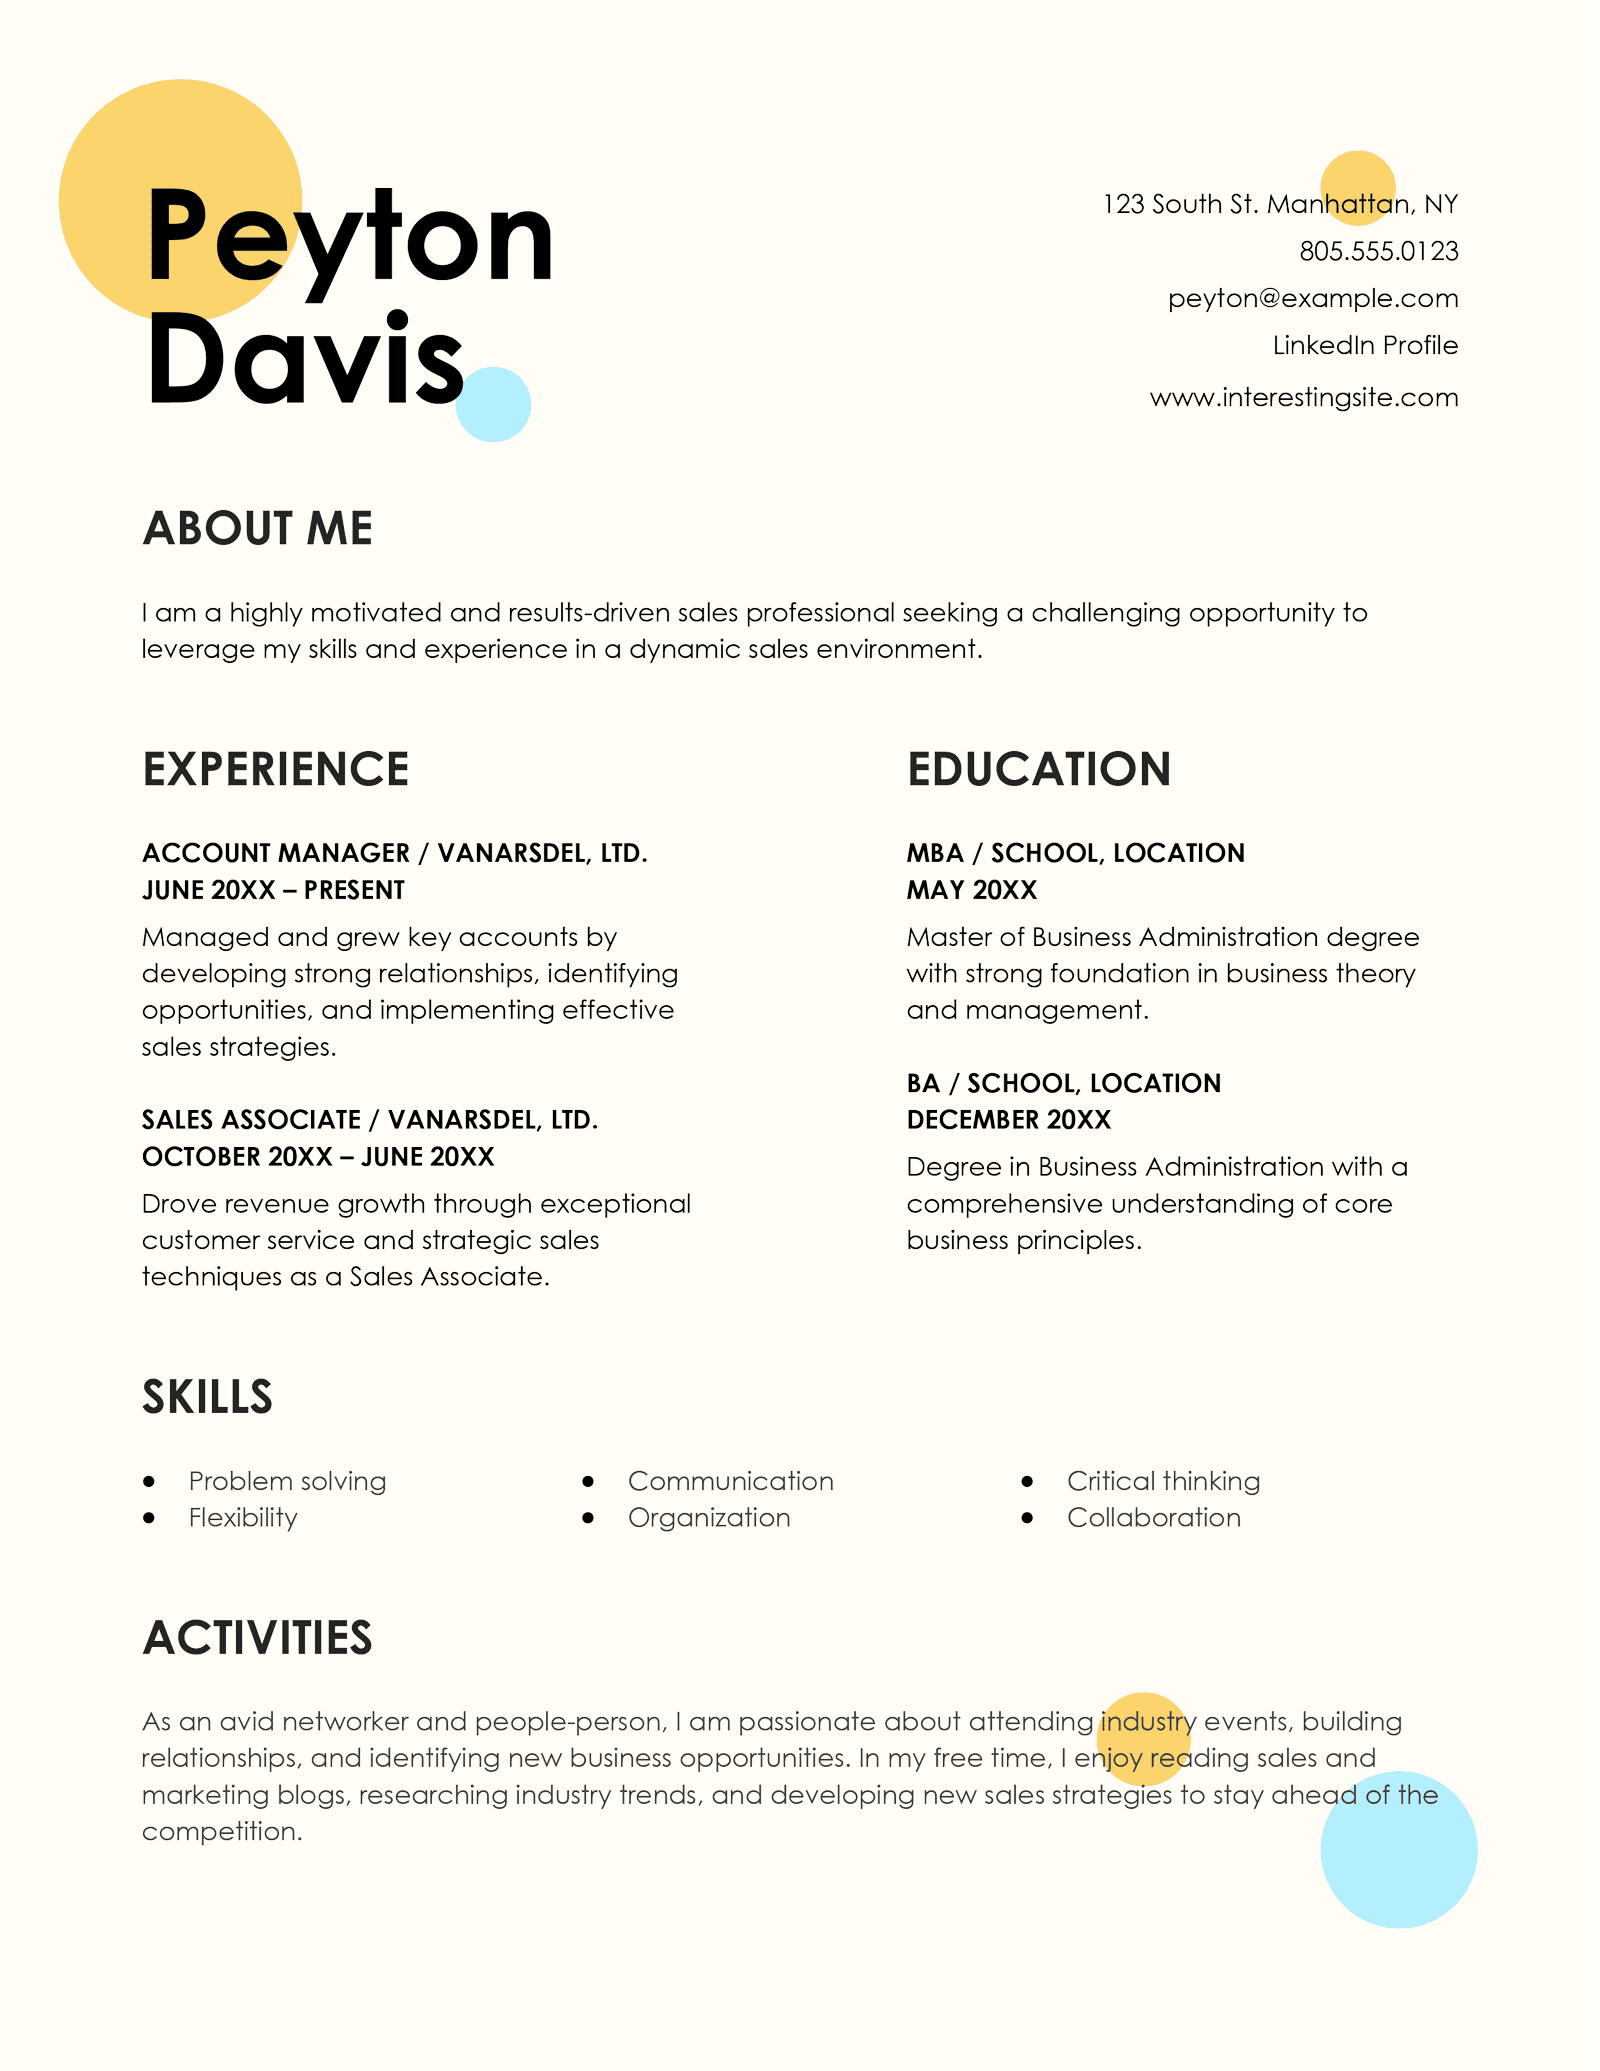 Creative CV template from Microsoft Word featuring yellow and blue spherical designs and a unique layout using both single and double columns.